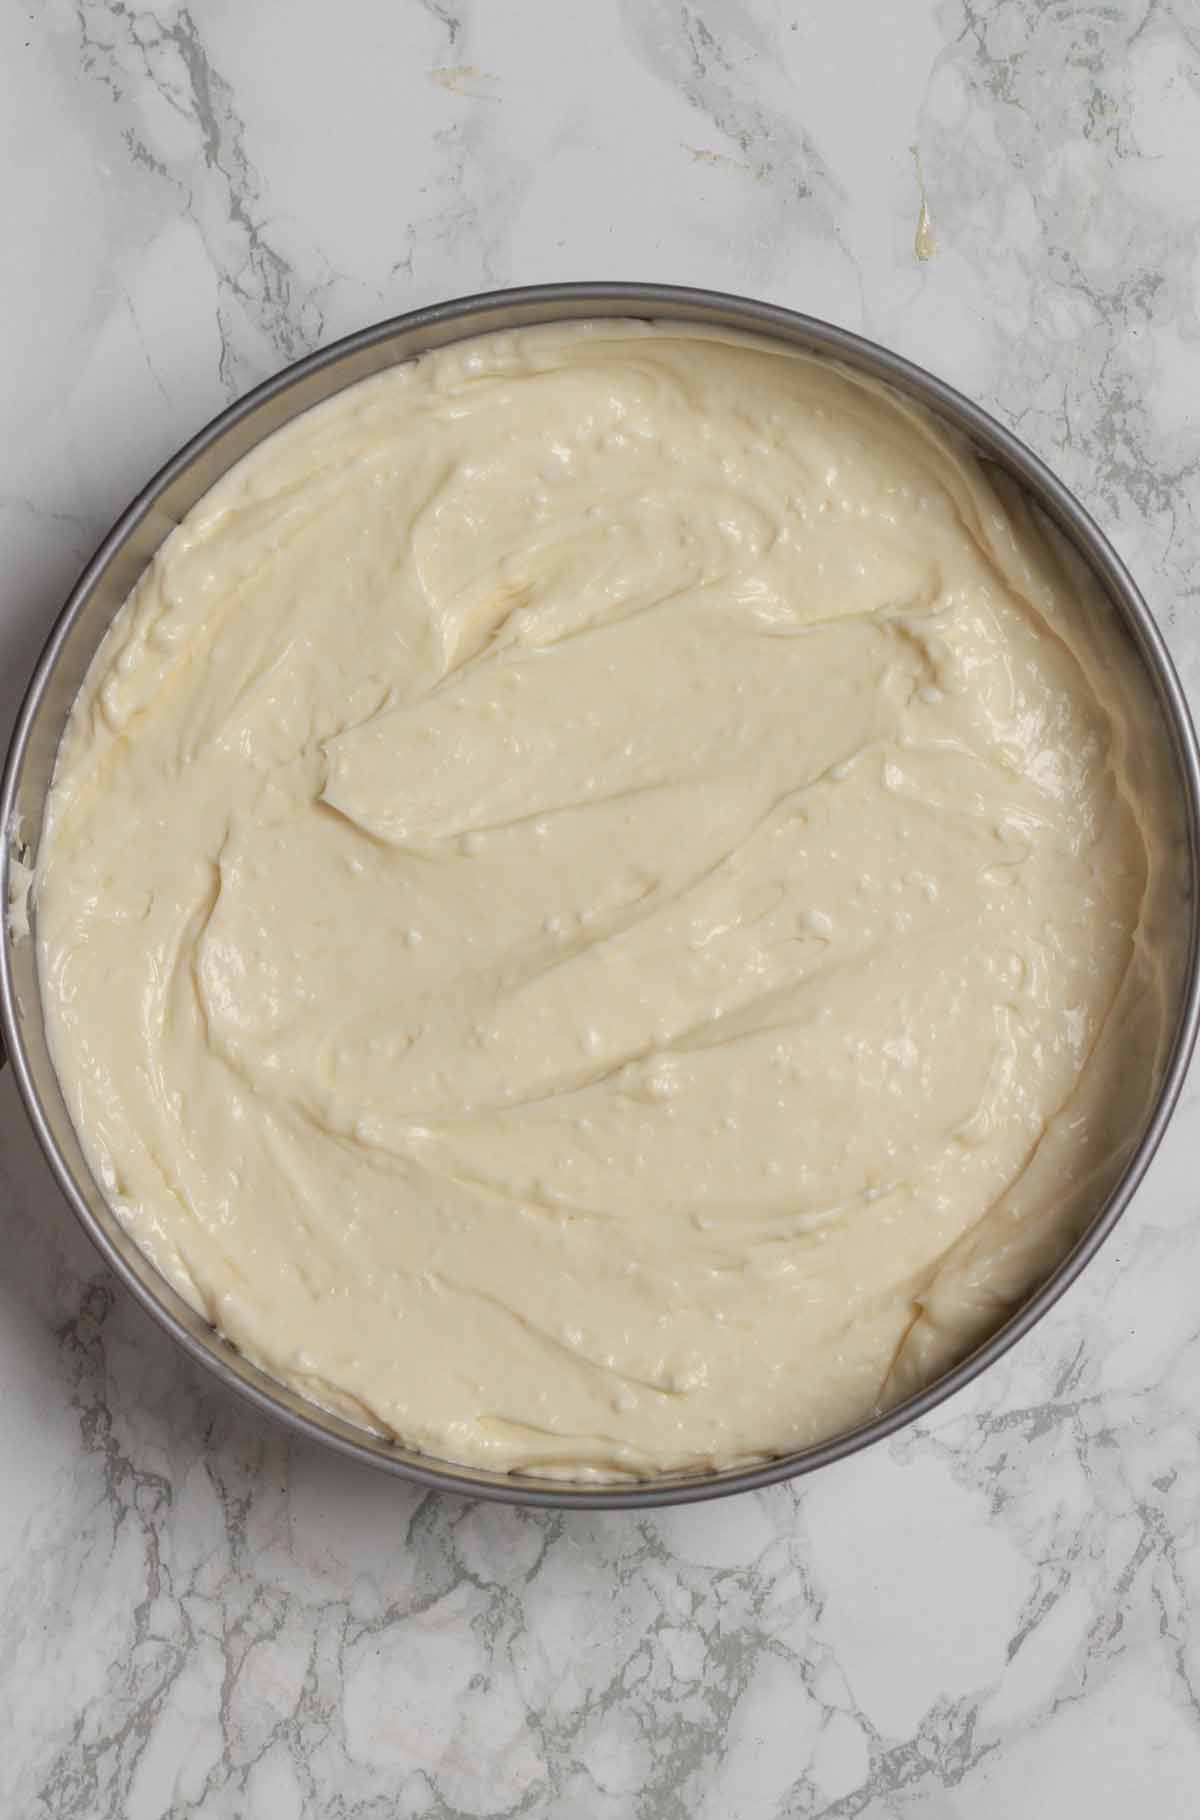 White Chocolate Filling Spread Over Base In The Tin